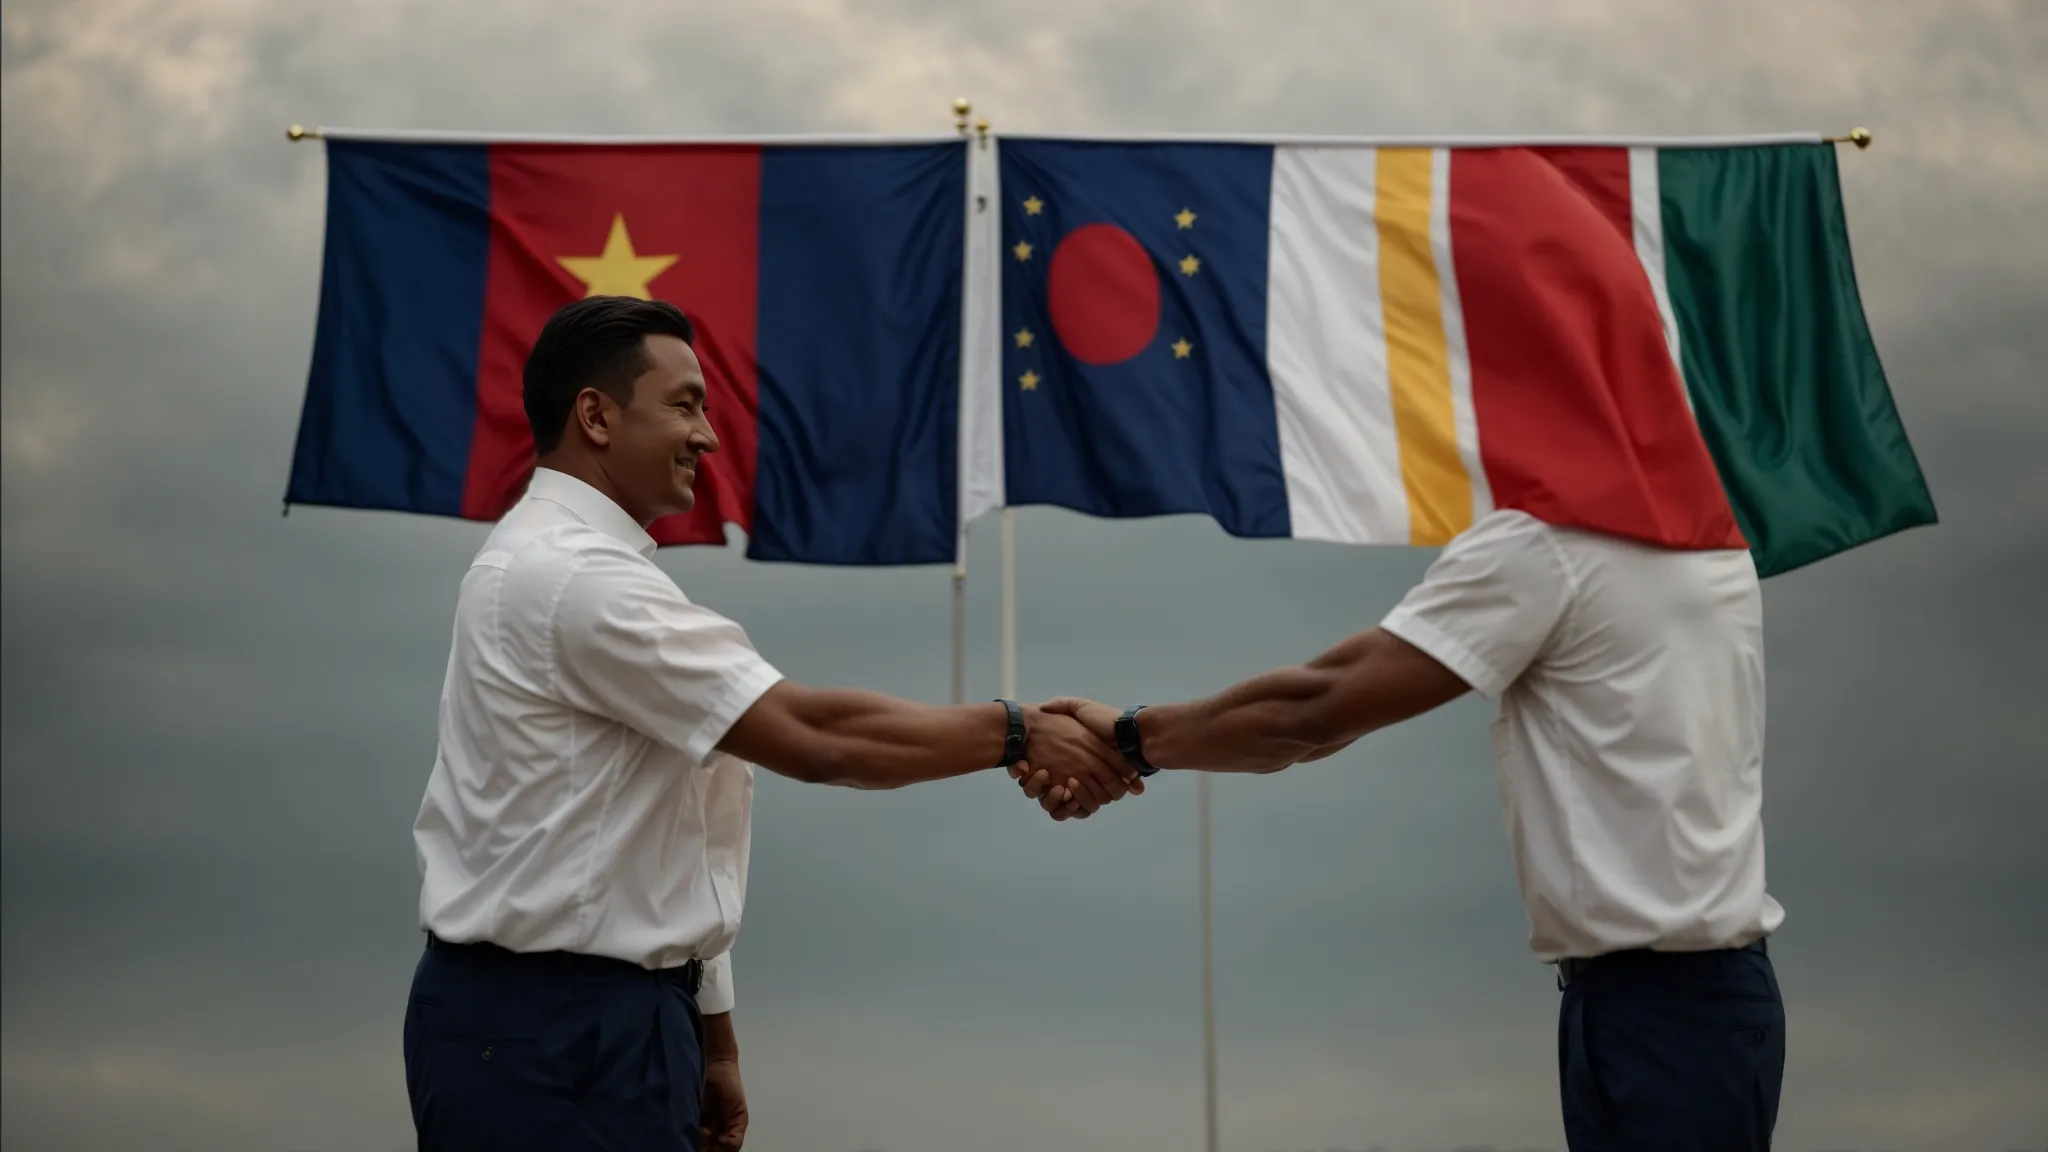 two diplomats shaking hands in front of national flags, symbolizing the signing of an international agreement.